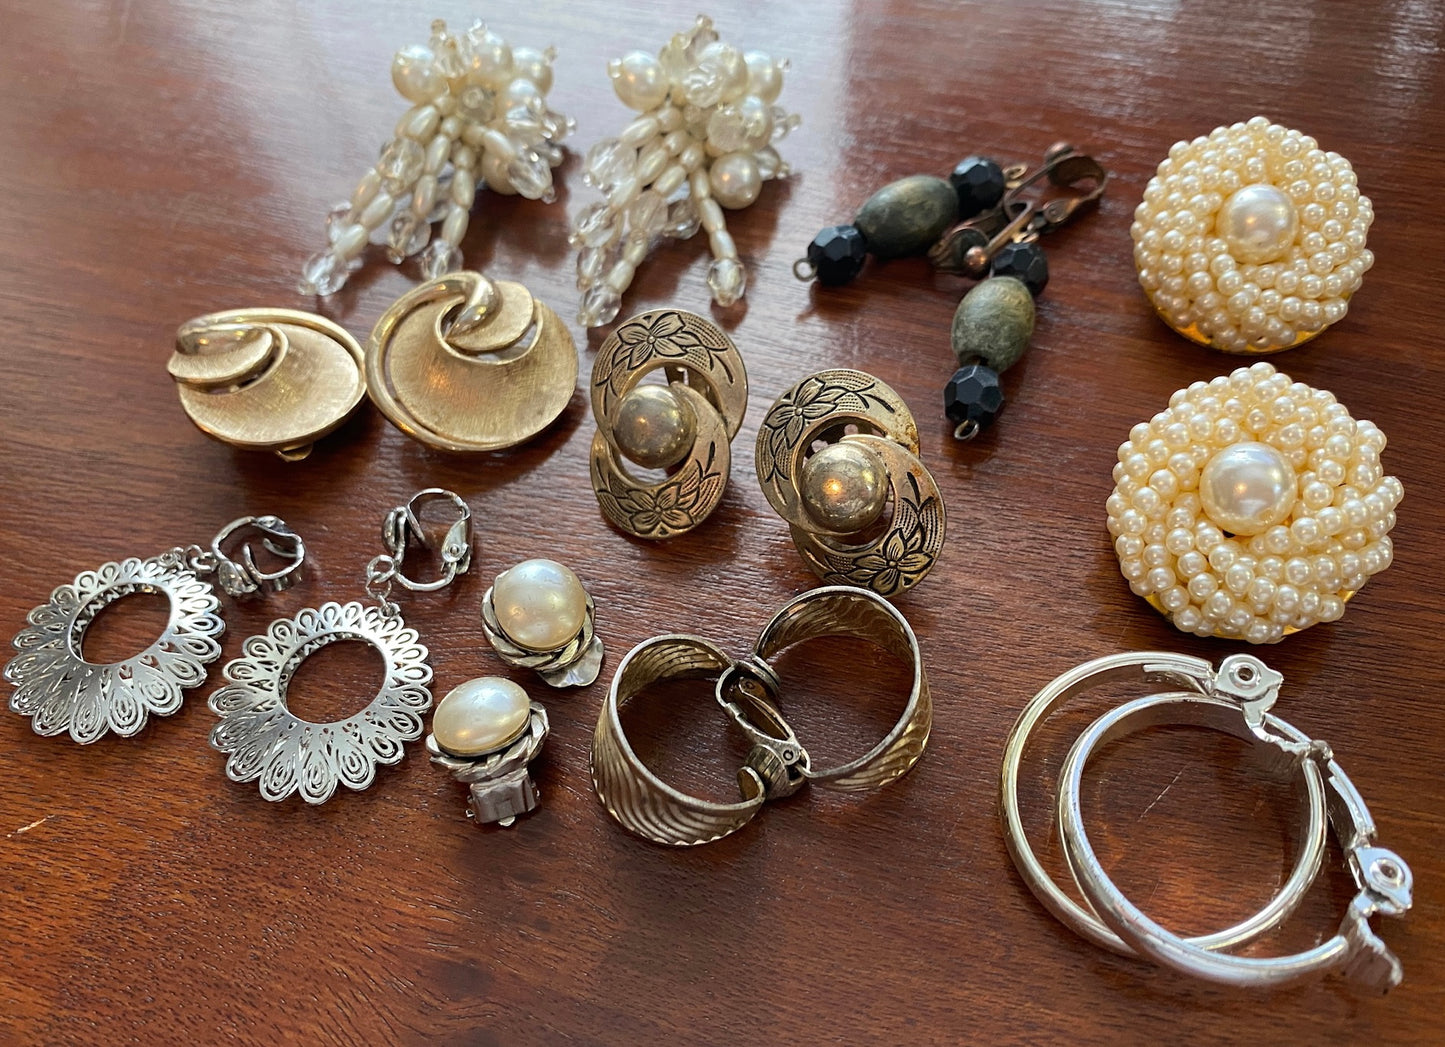 Huge Lot of Vintage Clip on Earrings Faux Pearl Gold Silver Tone Drop Dangly Cluster